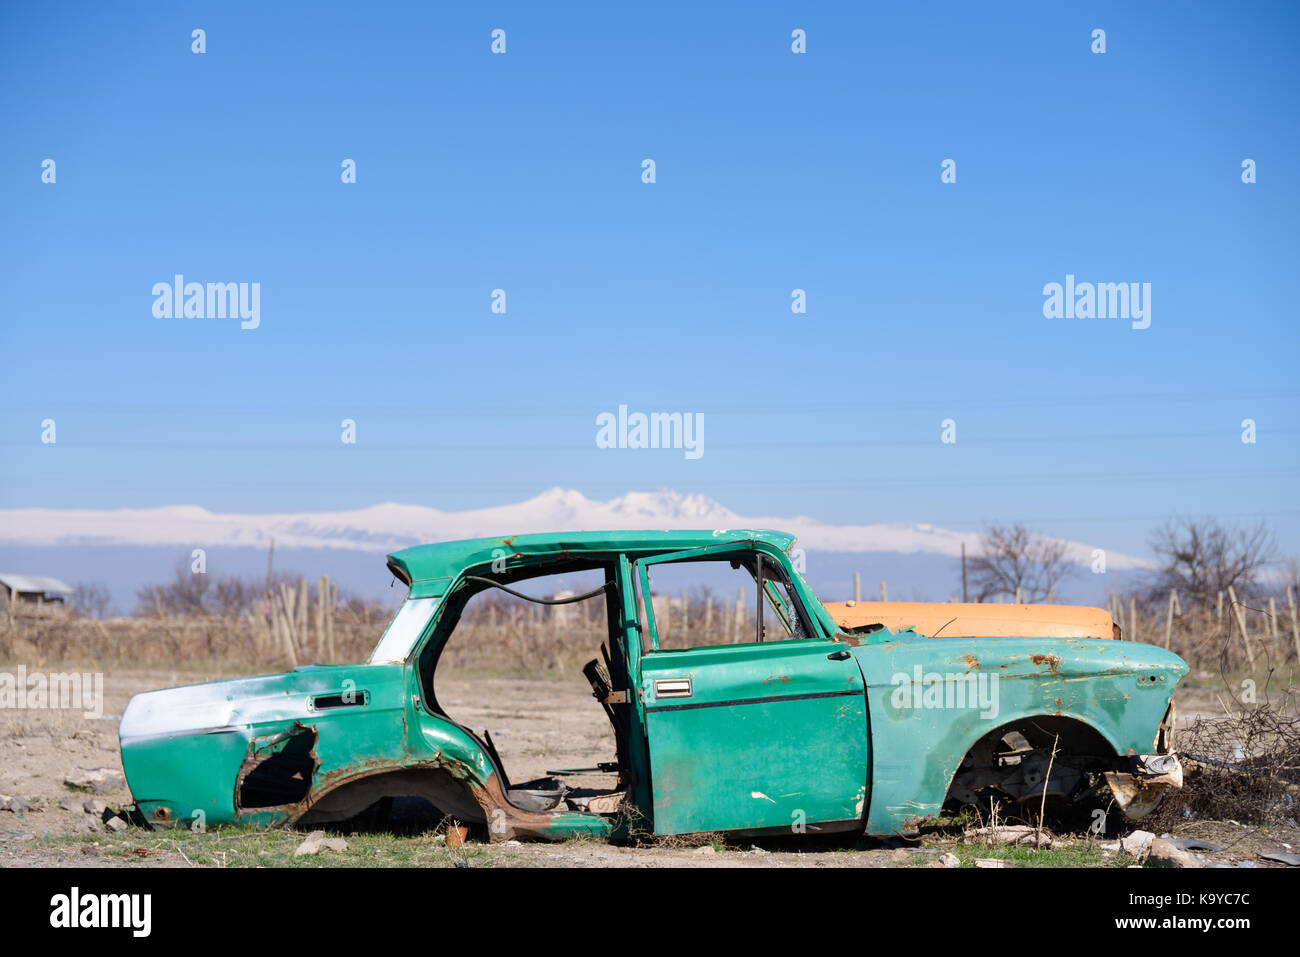 Abandoned and rusty wreck of an old green vintage Soviet Russian car in the middle of dry agricultural land with scenic snow-topped mountains and clea Stock Photo